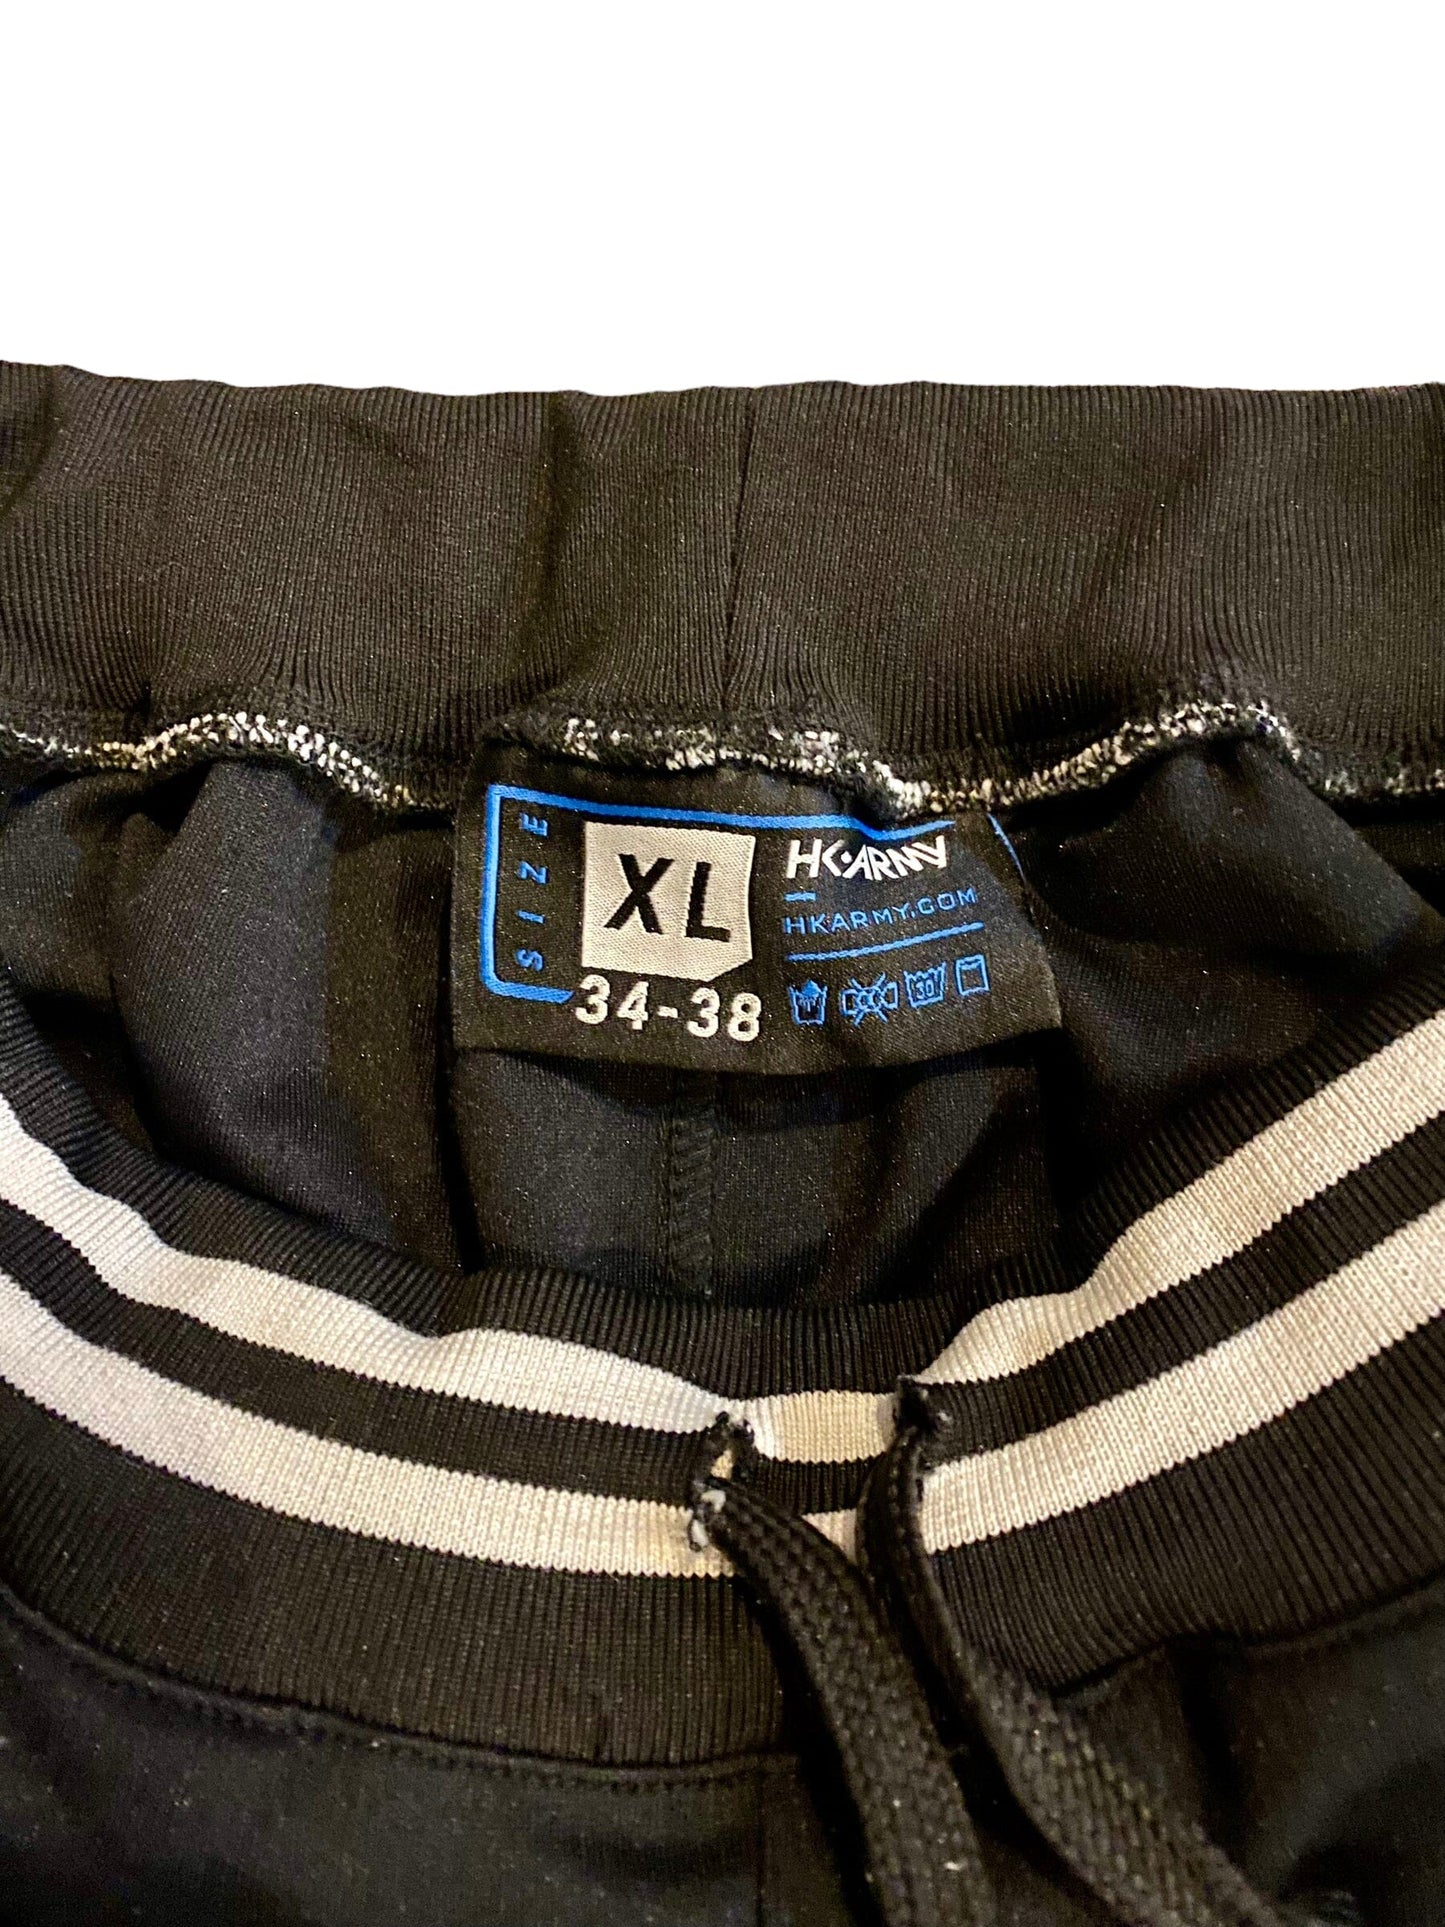 Used Hk Army TRK Jogger Style Pants Size XL Paintball Gun from CPXBrosPaintball Buy/Sell/Trade Paintball Markers, Paintball Hoppers, Paintball Masks, and Hormesis Headbands